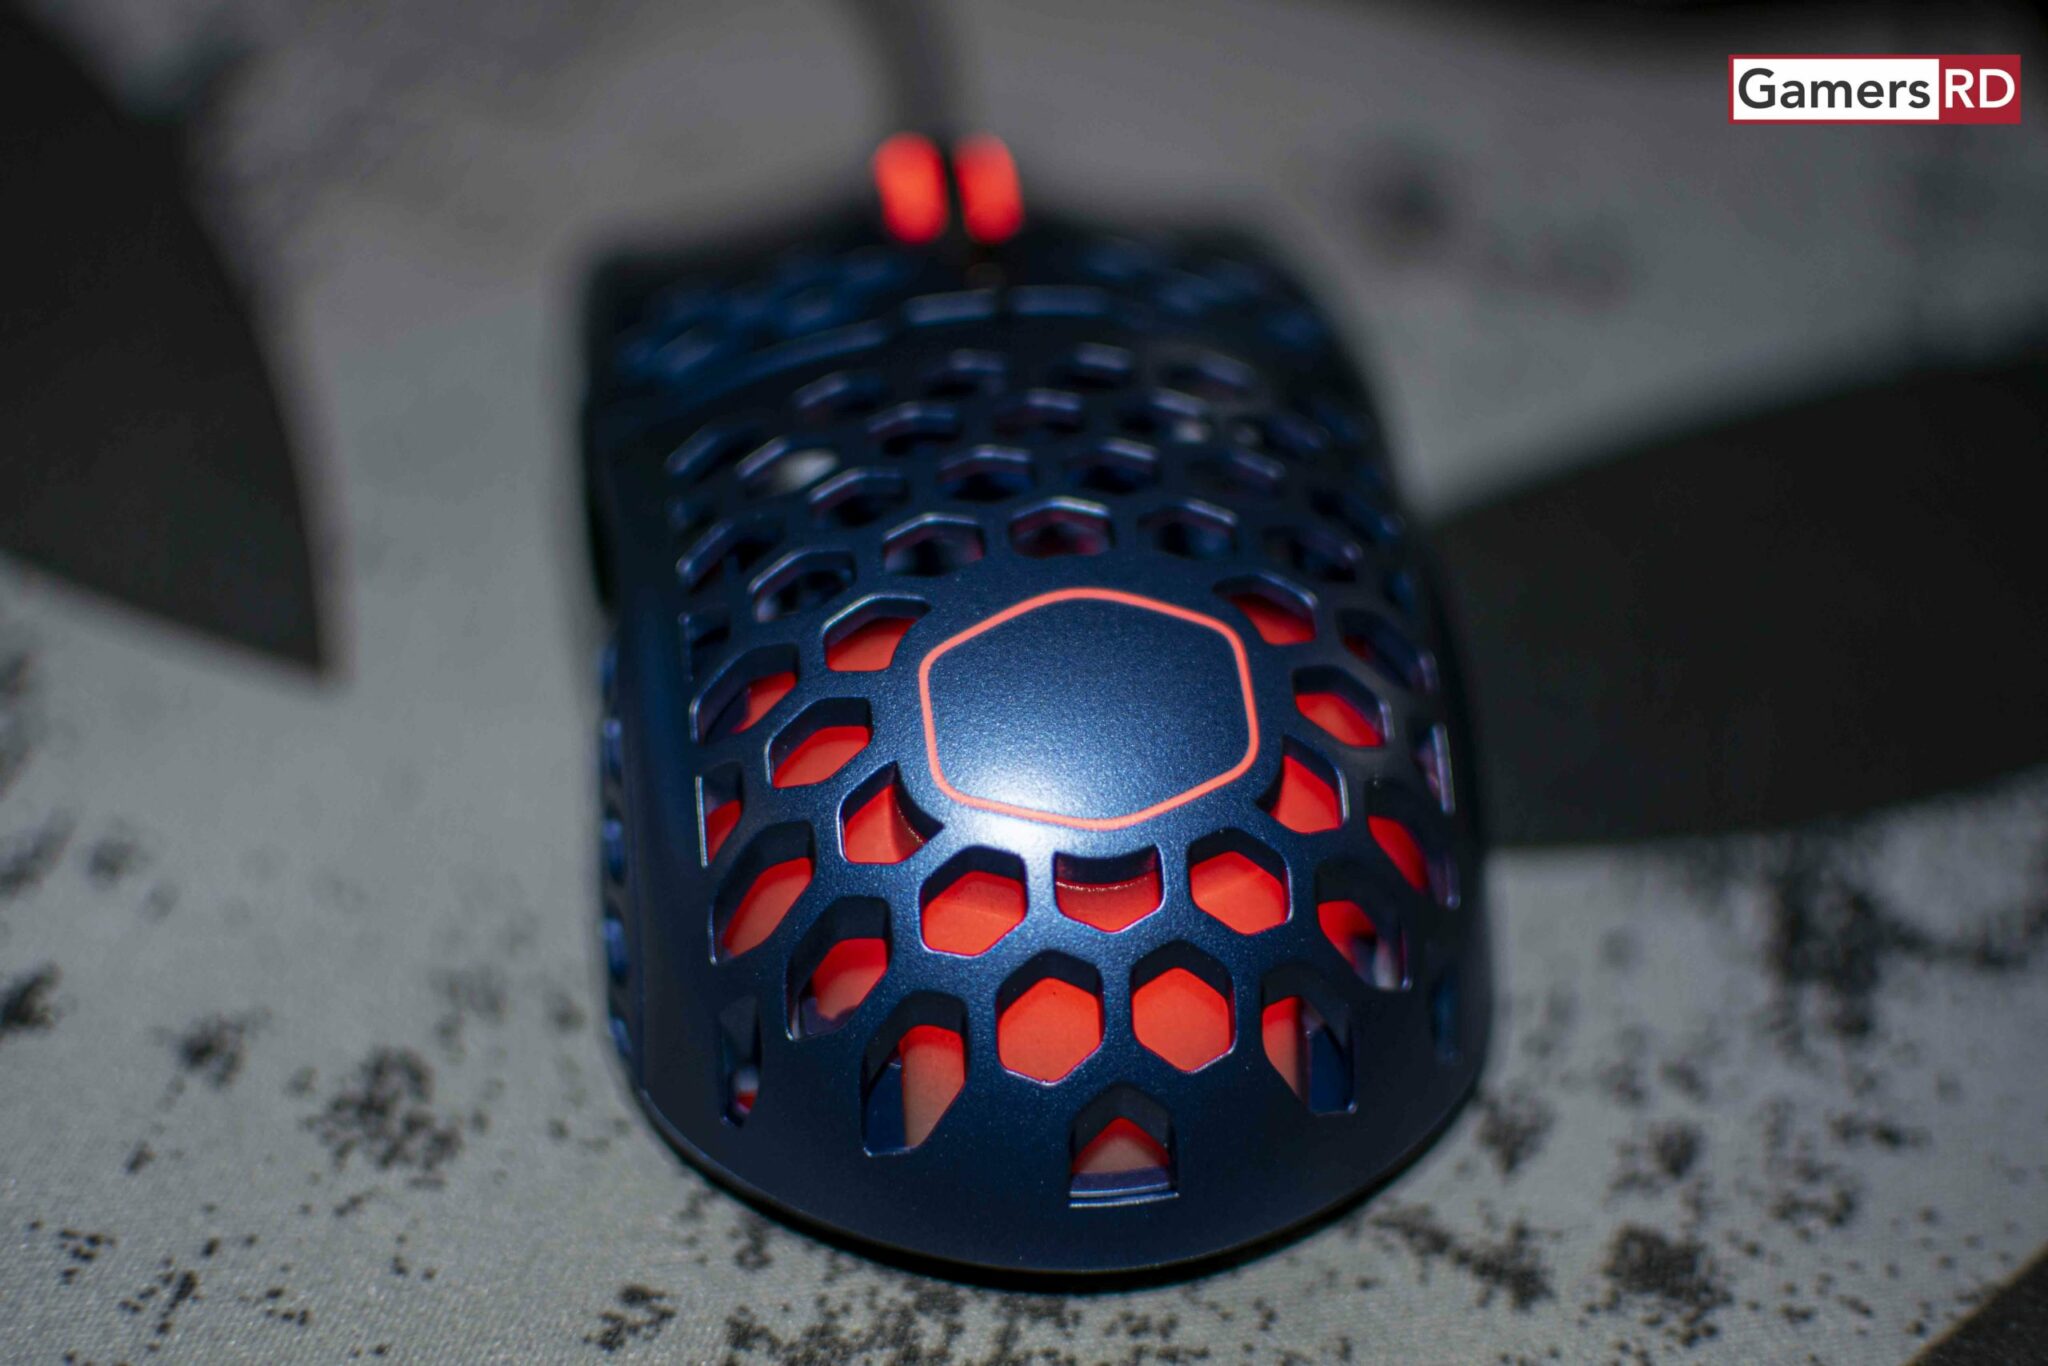 Cooler Master MM711 Gaming Mouse Review, 5 GamersRD